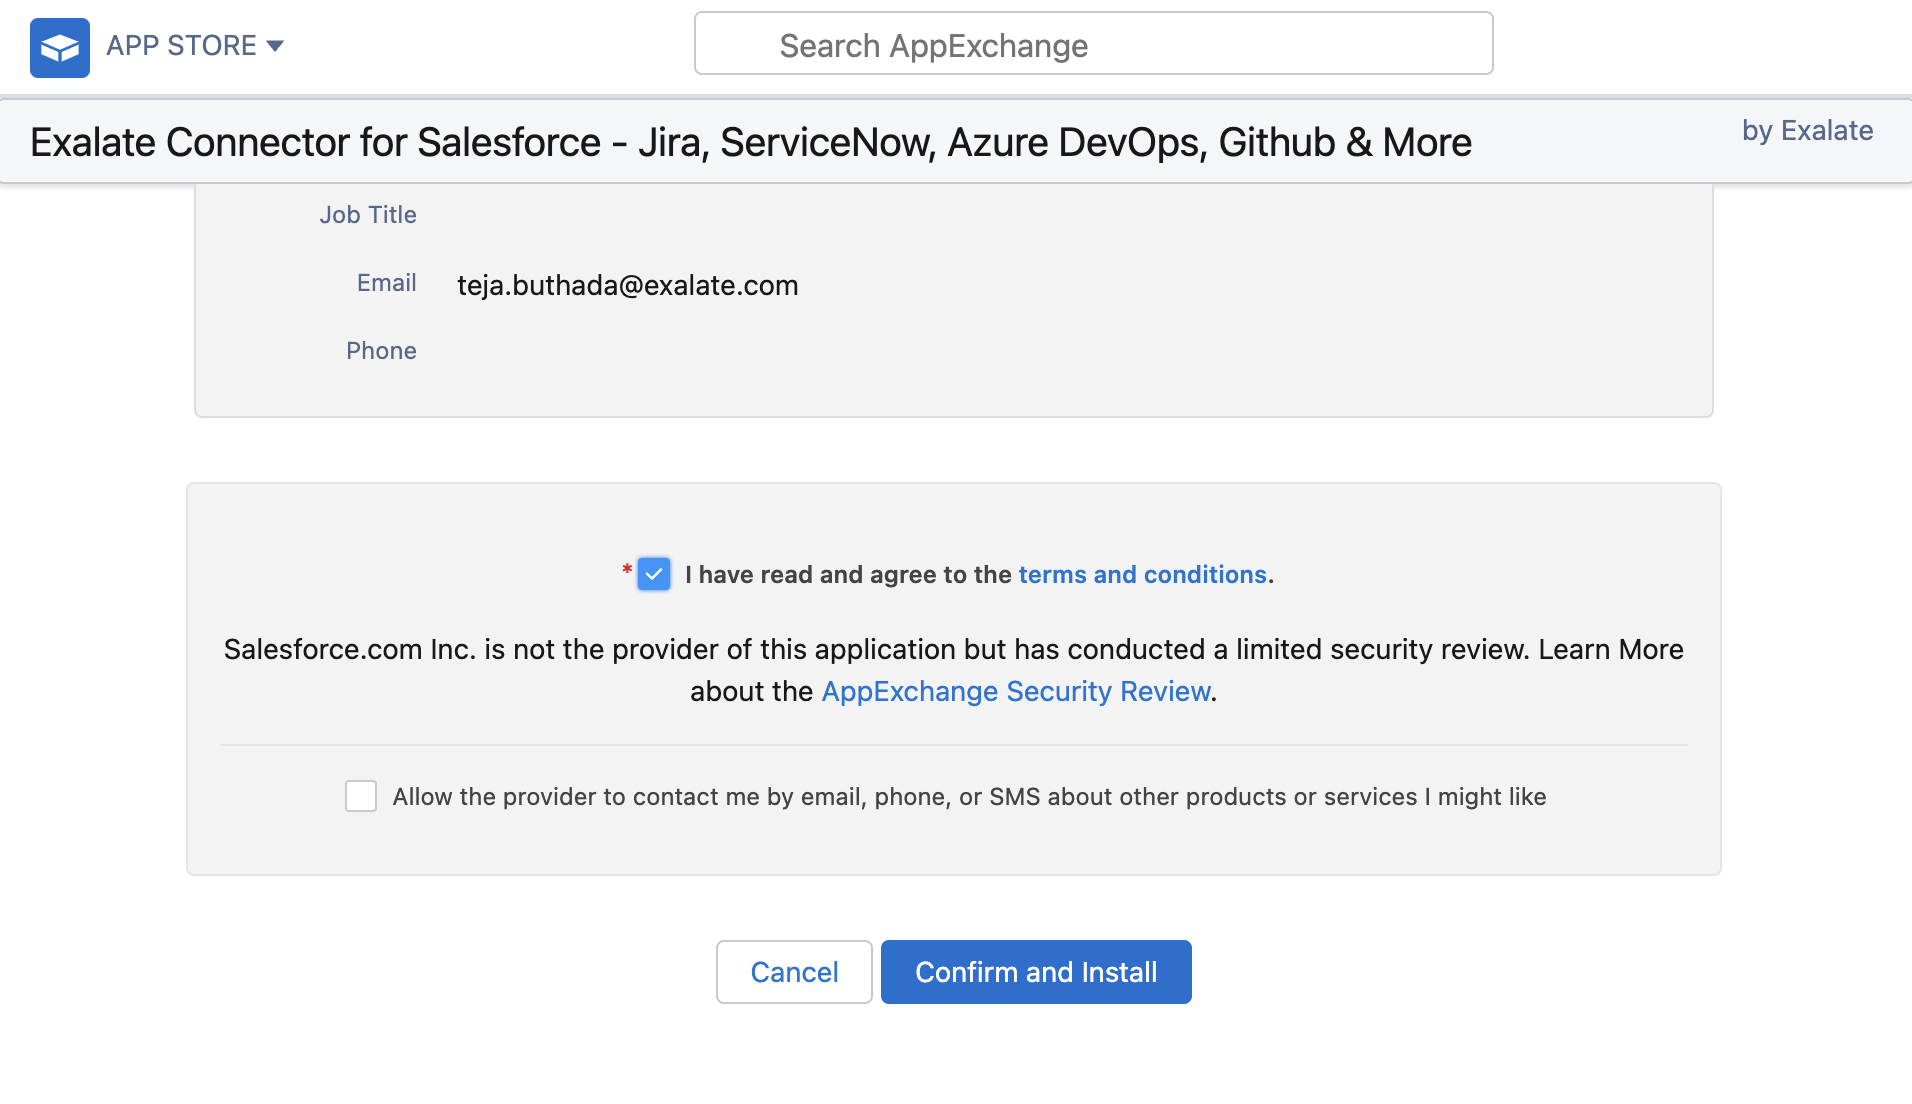 Confirm and install Exalate in Salesforce